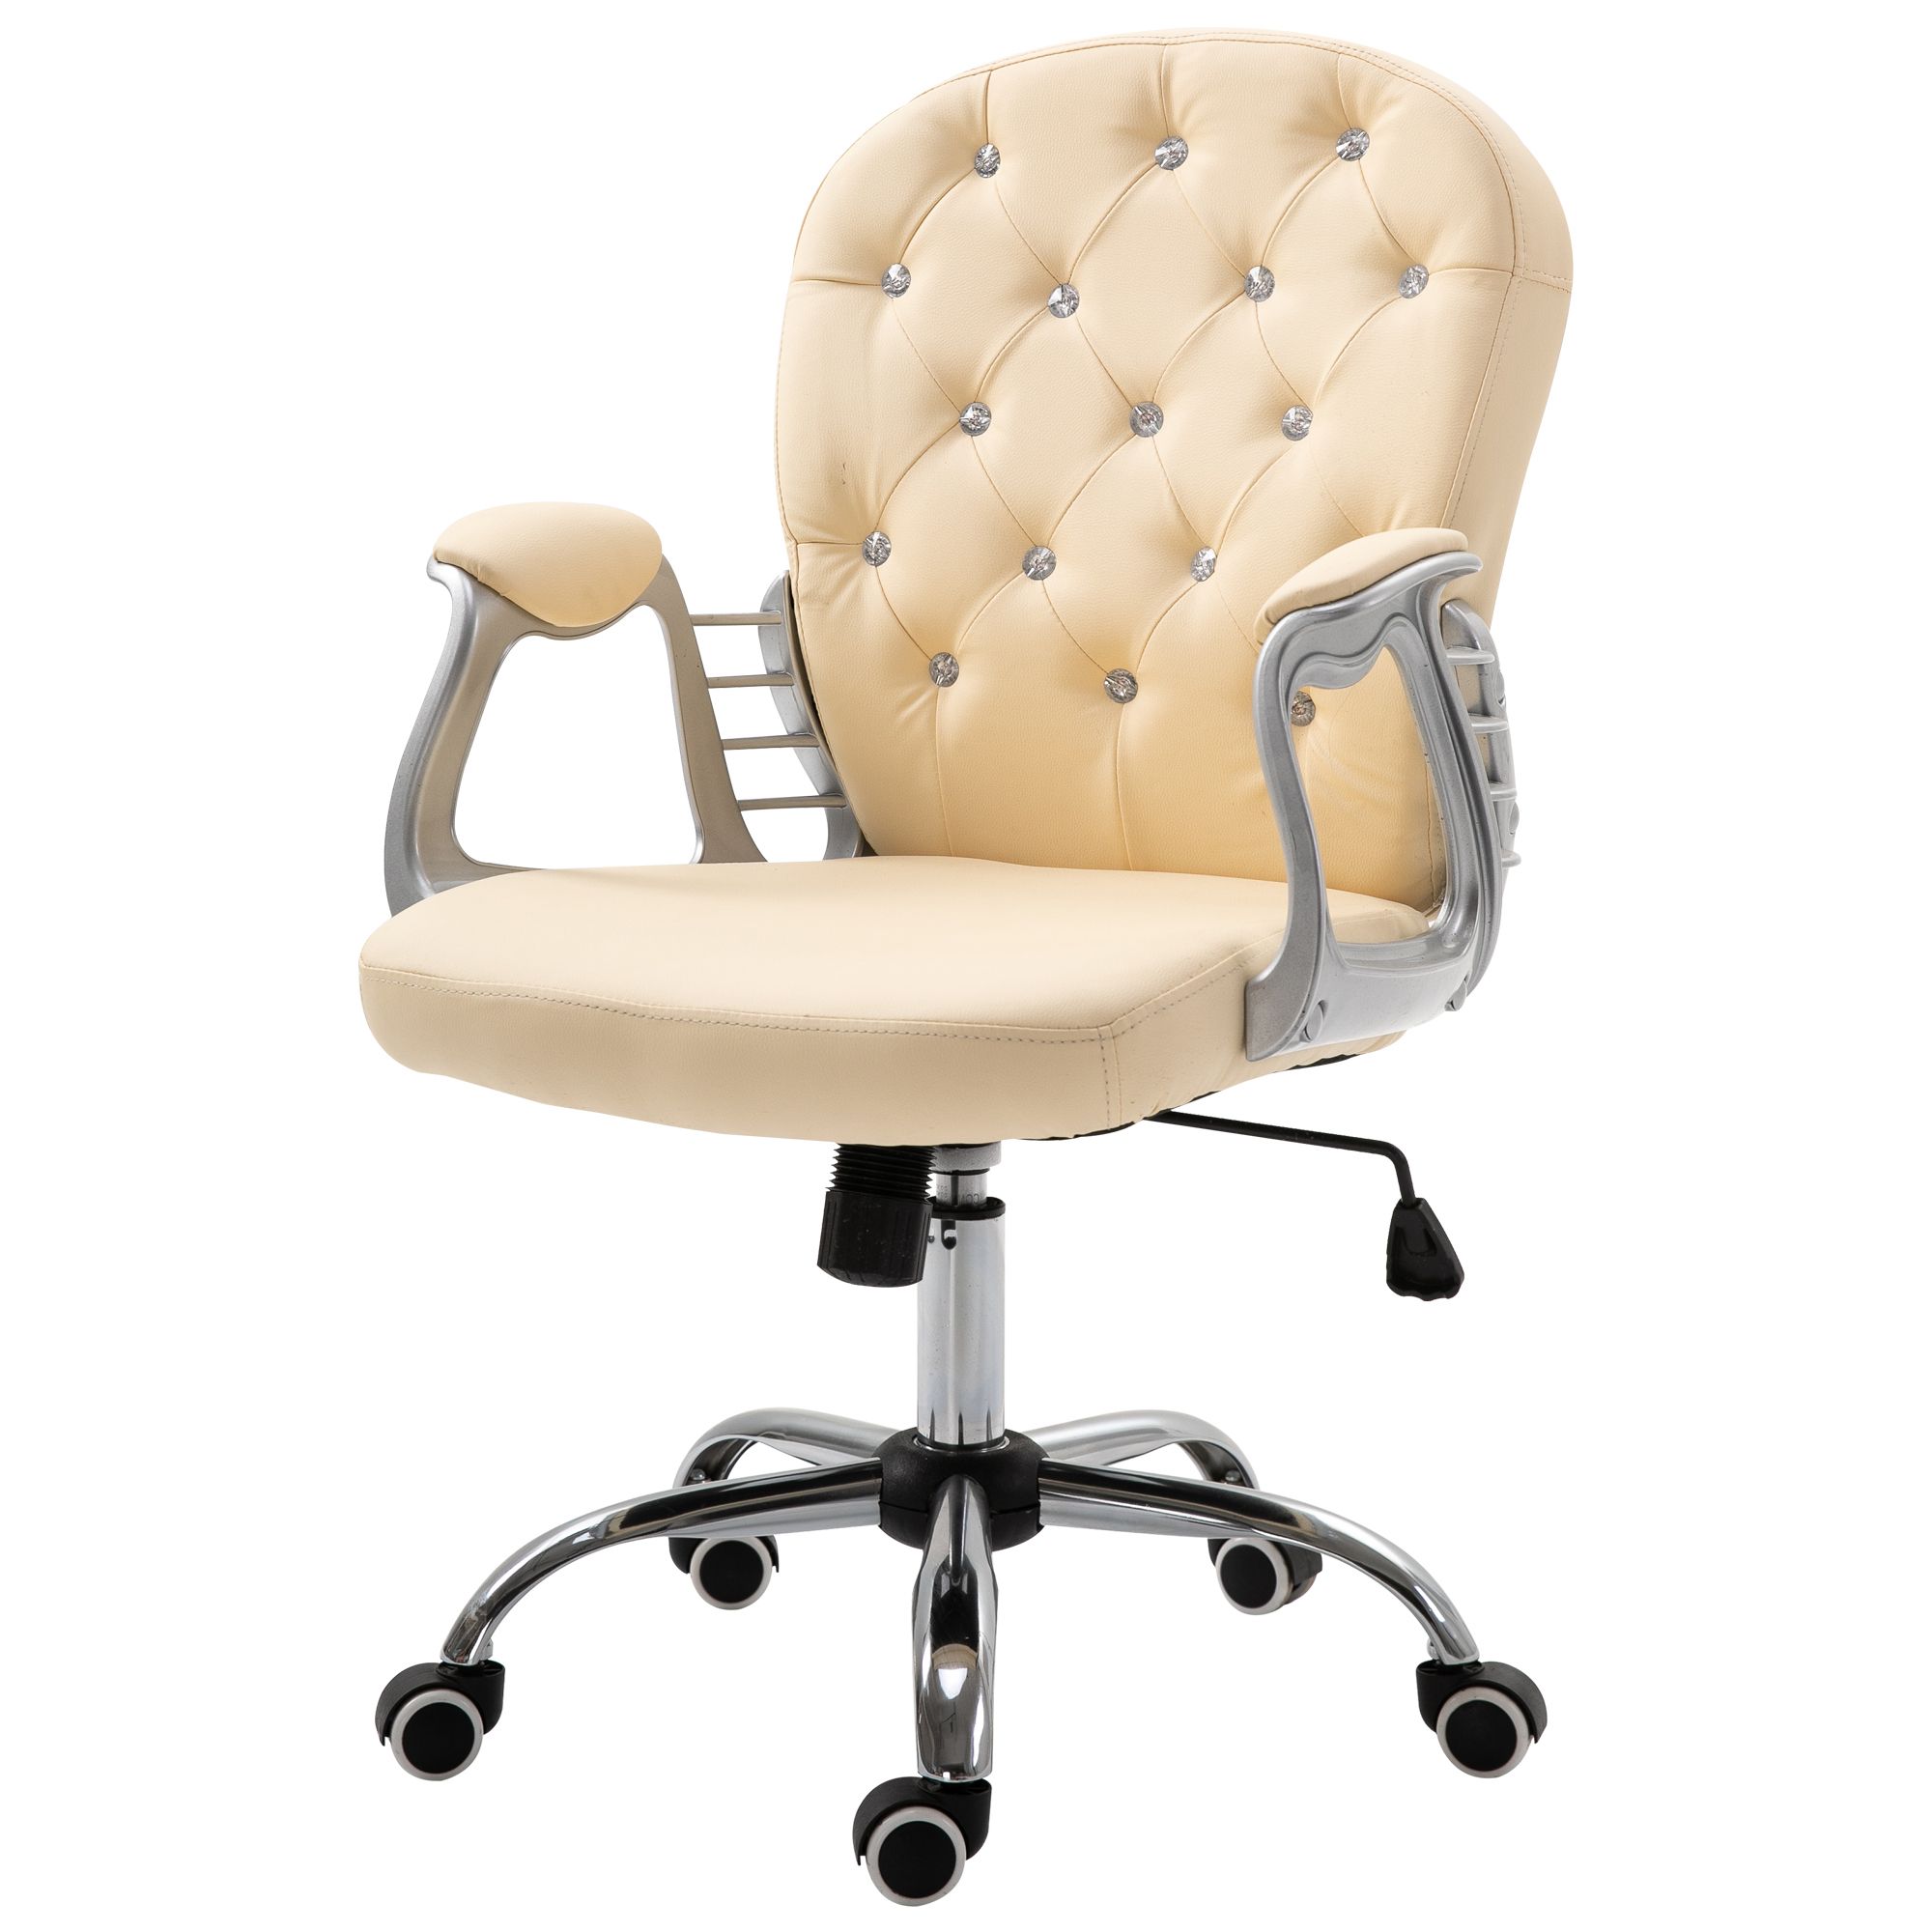 Vinsetto Vanity Middle Back Office Chair Tufted Backrest Swivel Rolling Regarding Most Recent Fabric Outdoor Middle Chair Sets (View 13 of 15)